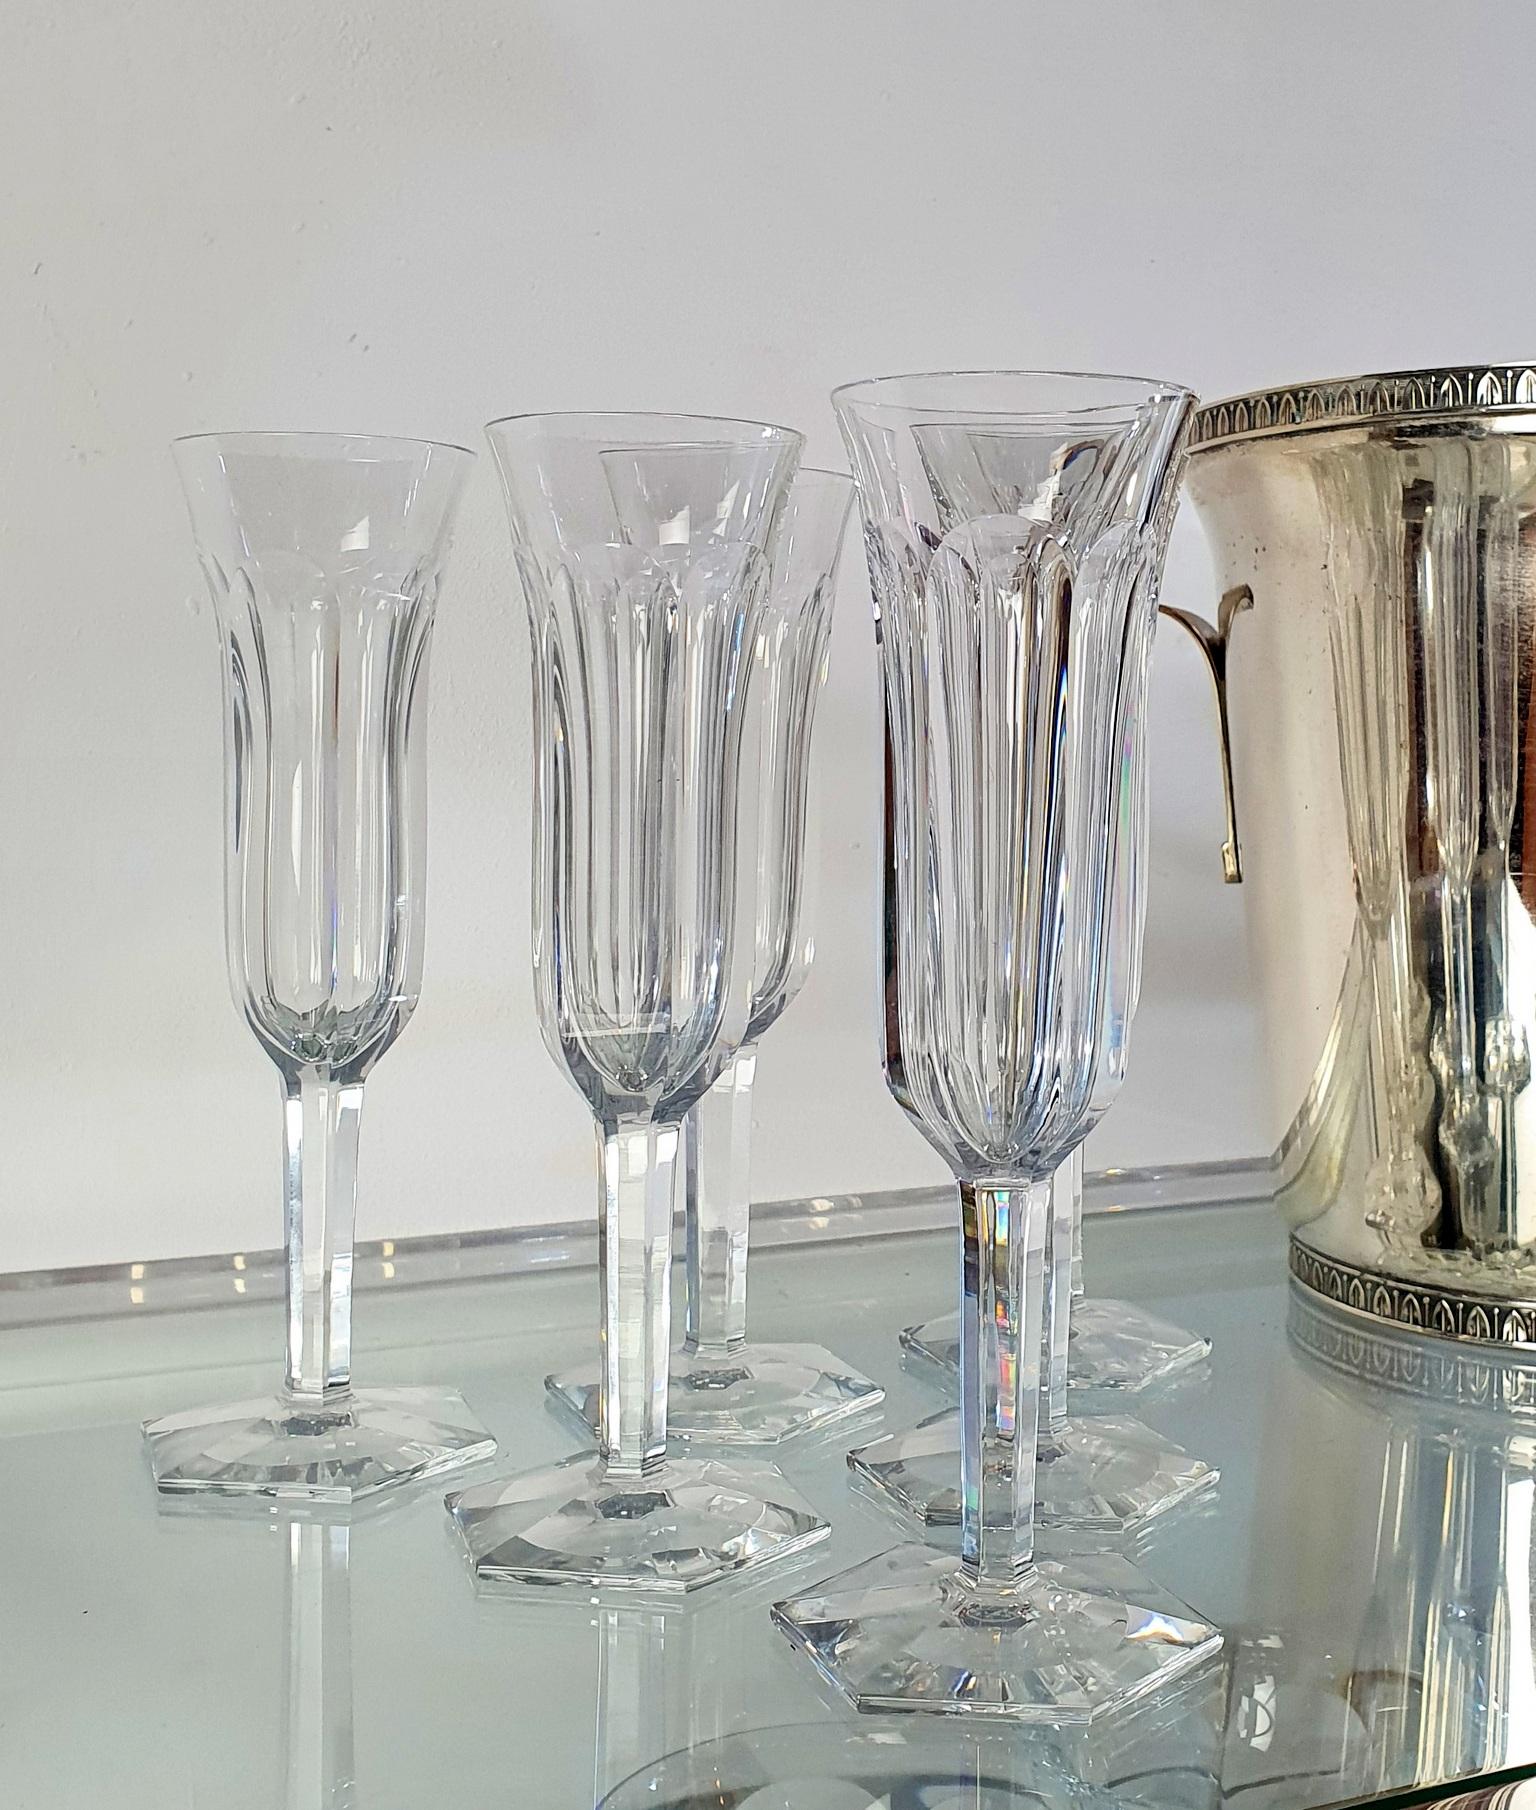 Baccarat Crystal Champagne Flutes Set of 6 In Excellent Condition For Sale In Albano Laziale, Rome/Lazio